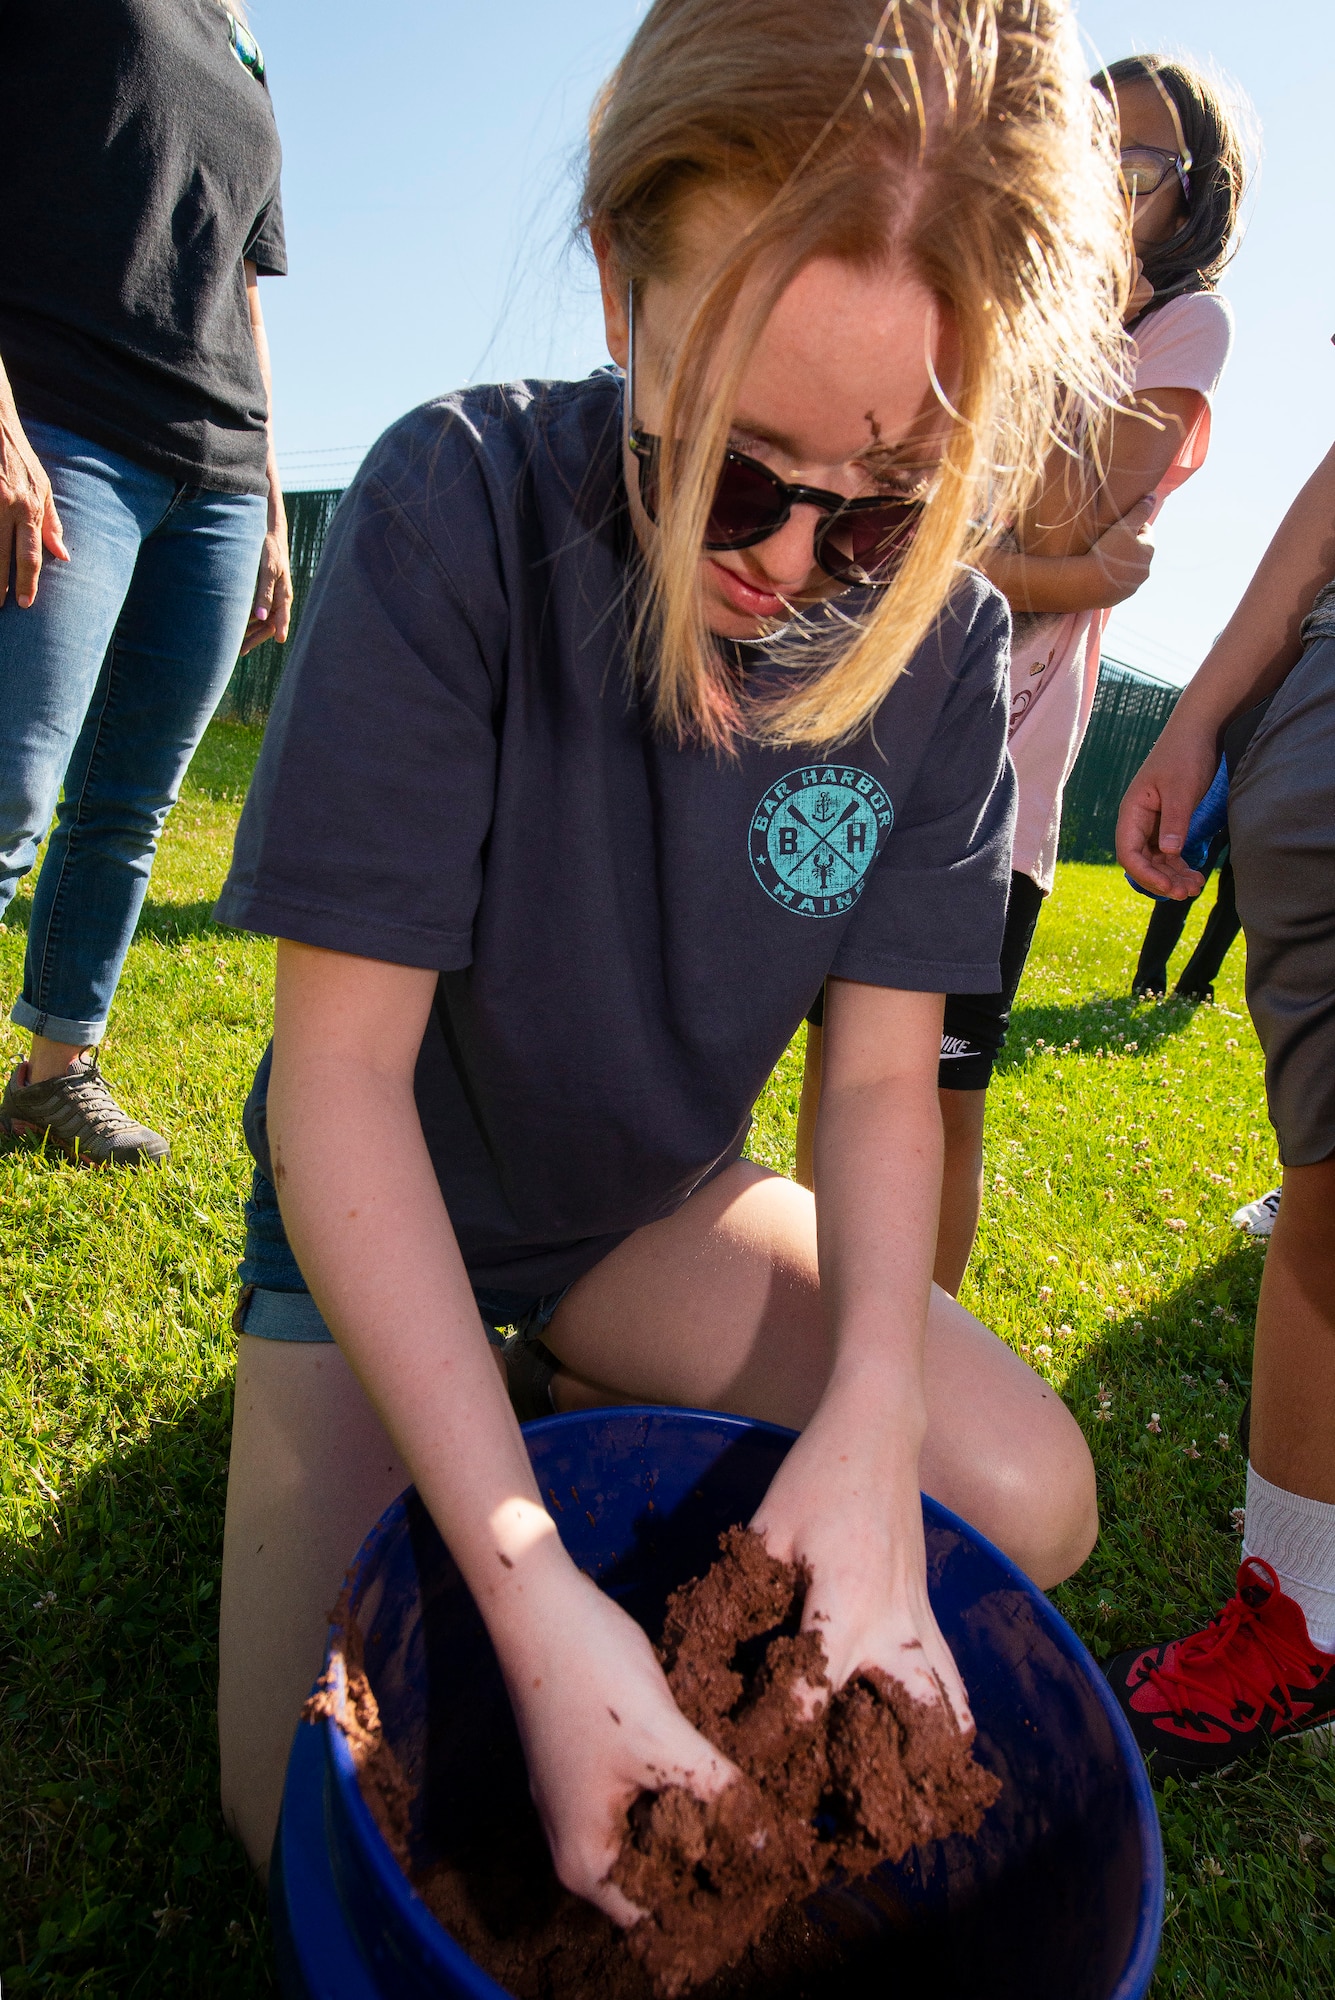 Brennen Rice, 11, mixes mud and seeds to form “seed bombs” June 17 at Prairies Youth Center near Wright-Patterson Air Force Base. The project was part of Pollinator Week, with the goal of increasing the access bees and butterflies have to native flowers for food